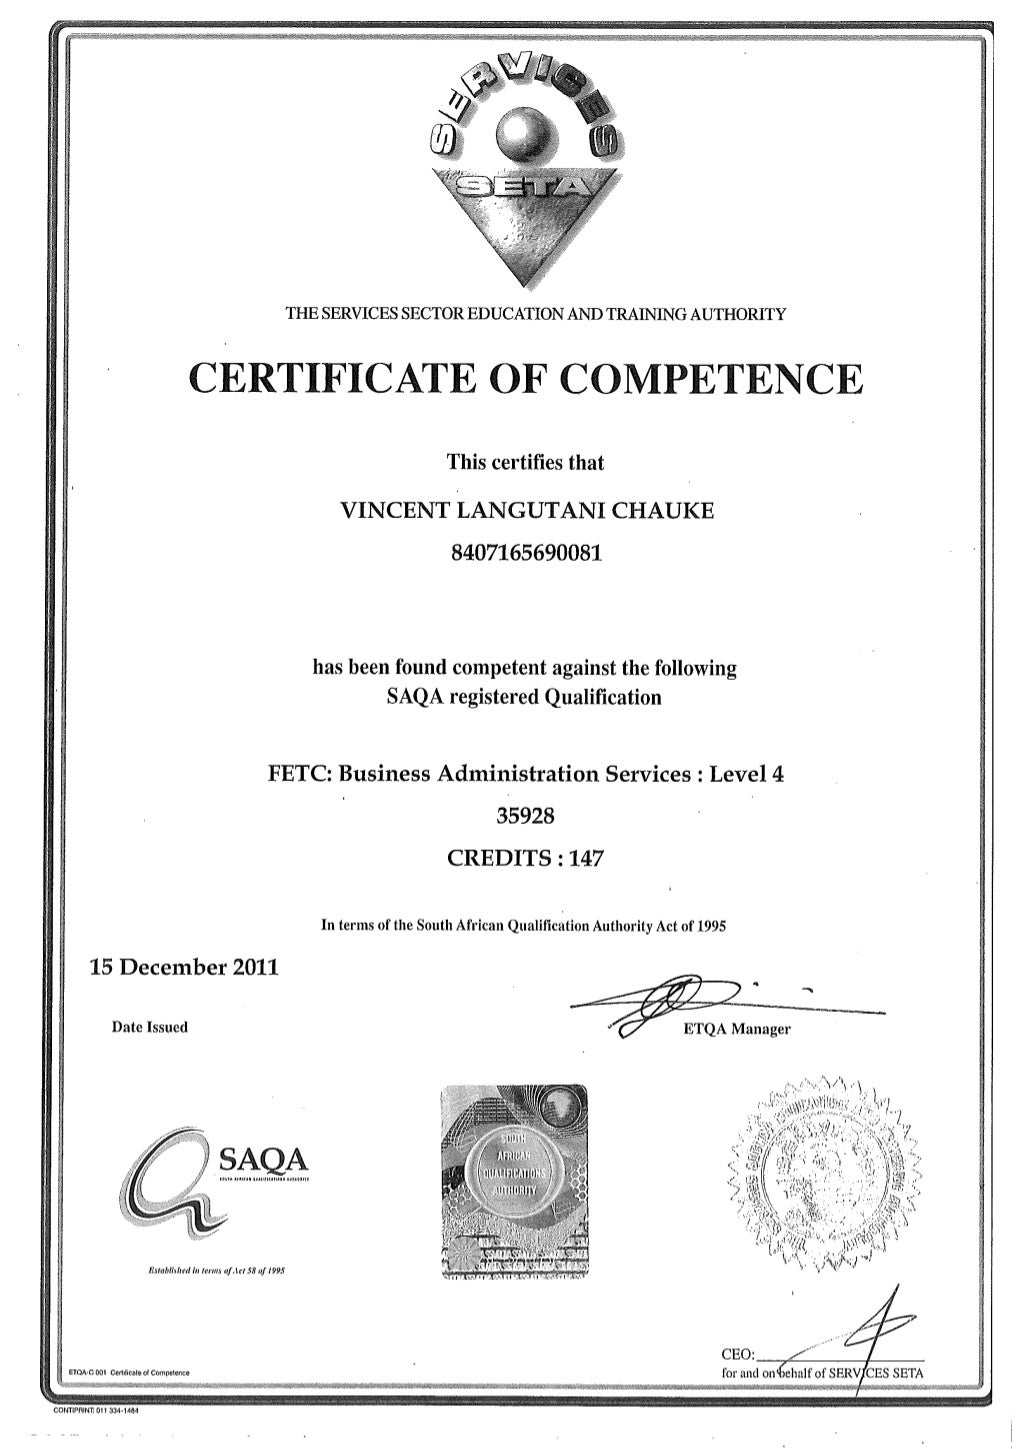 Business Administration NQF Level 4 Certificate